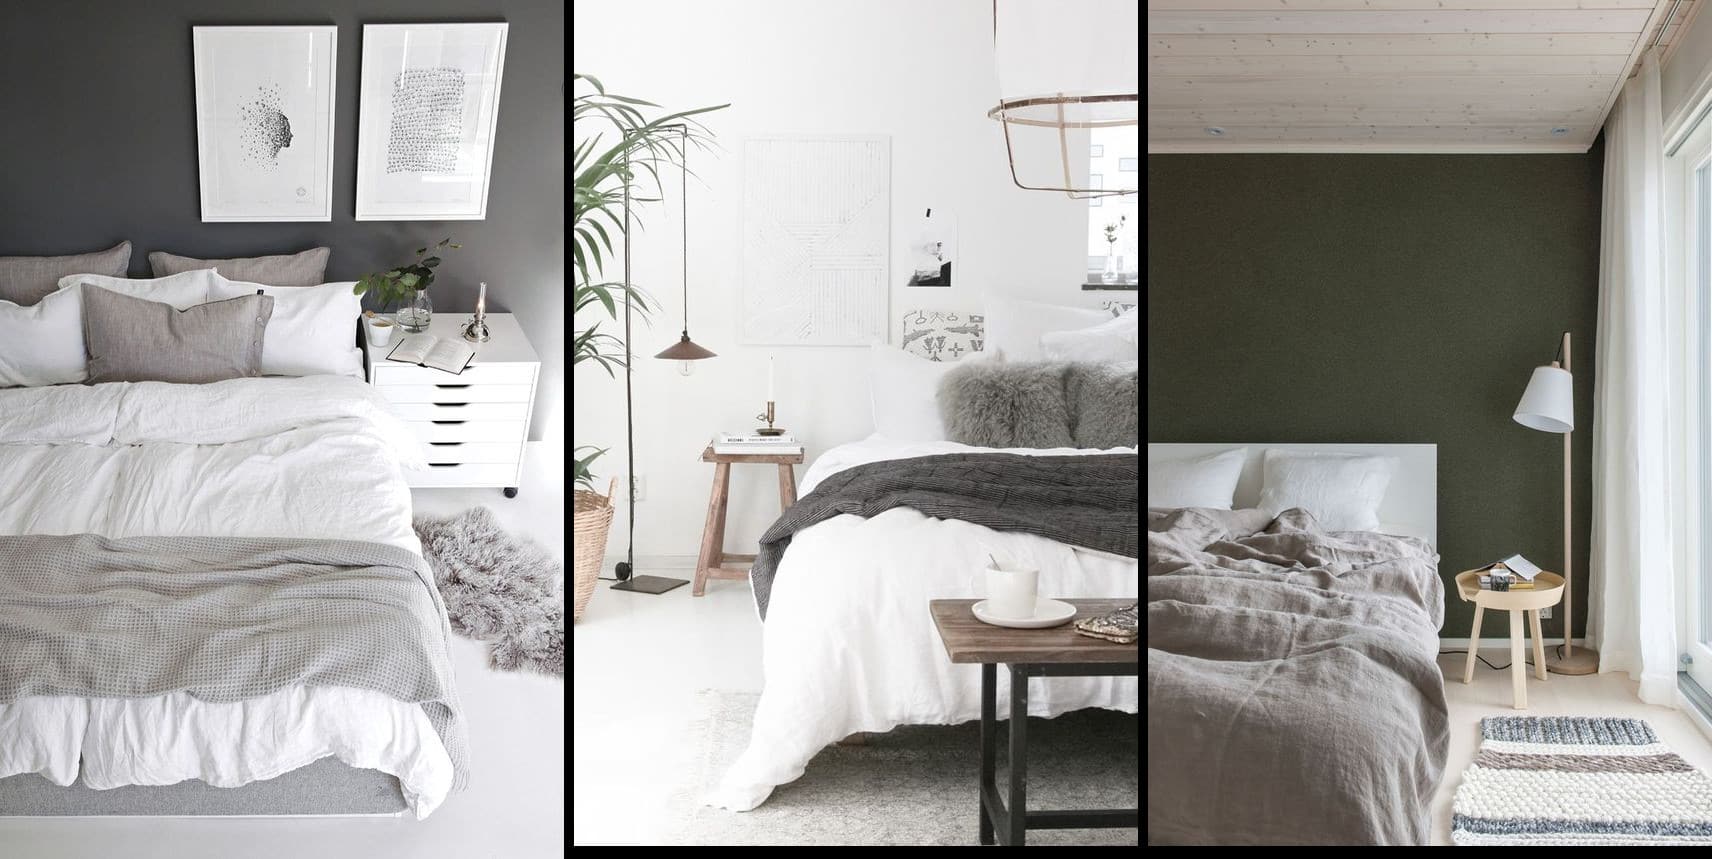 Are Scandinavian Beds Designed for Comfort and Durability?